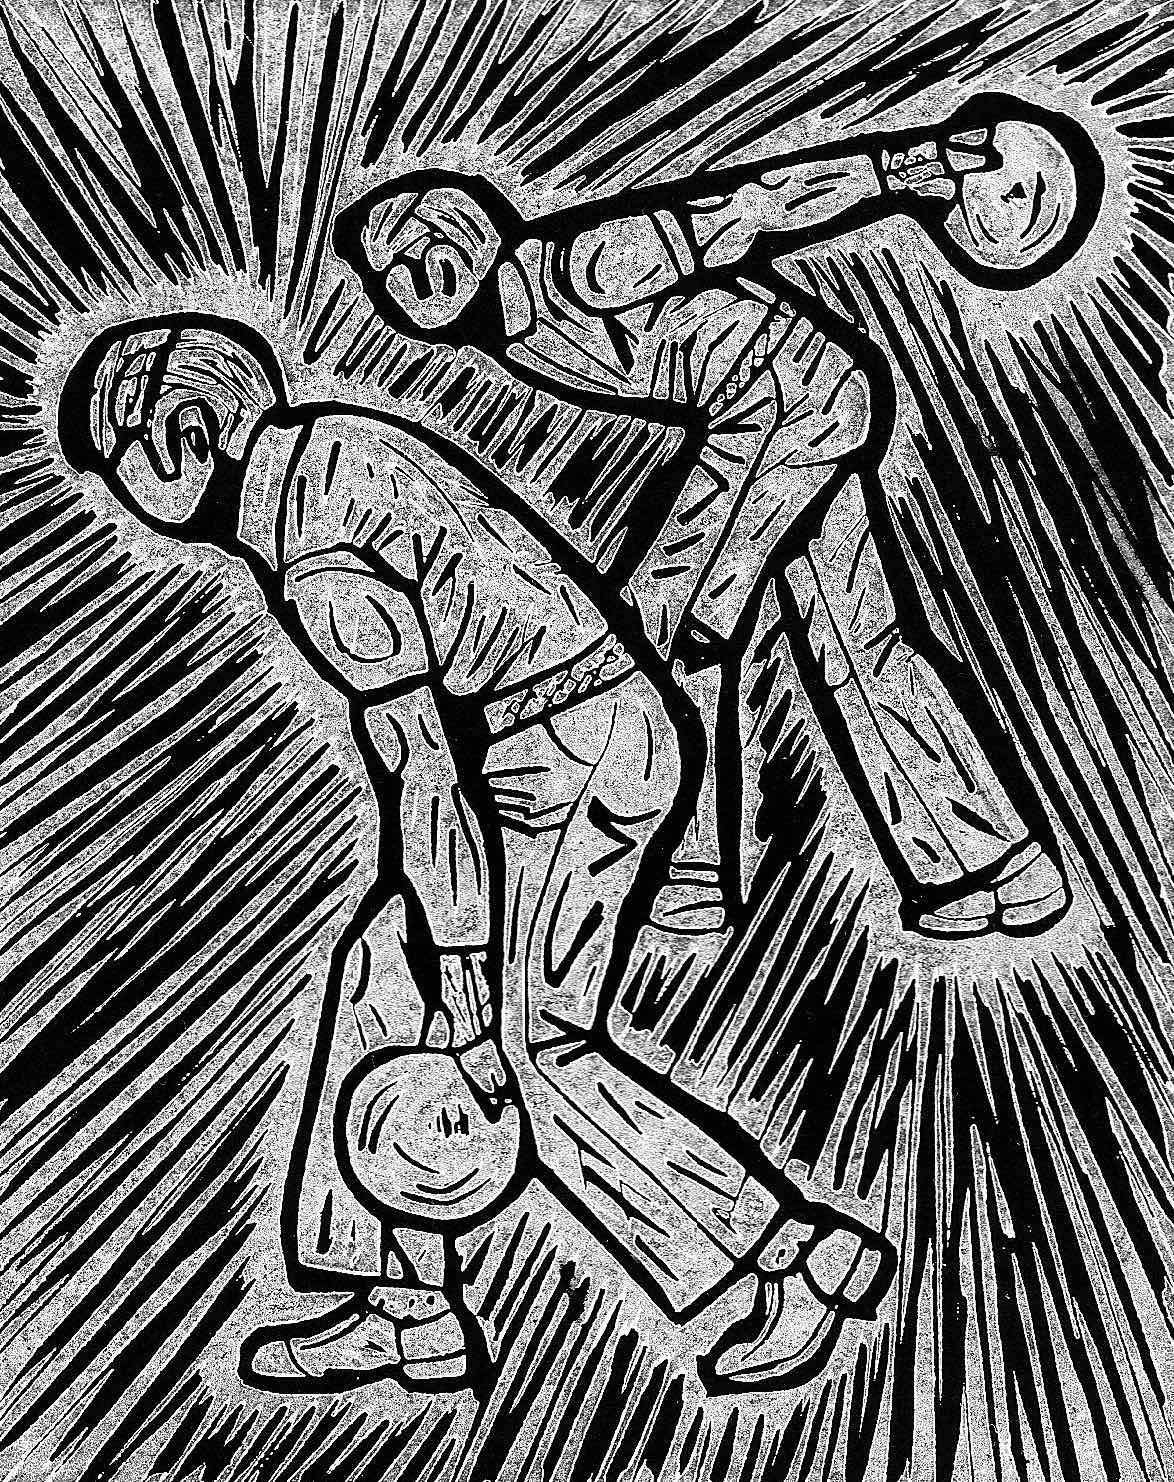 Block print of a bowler throwing a strike by Charly Fasano.